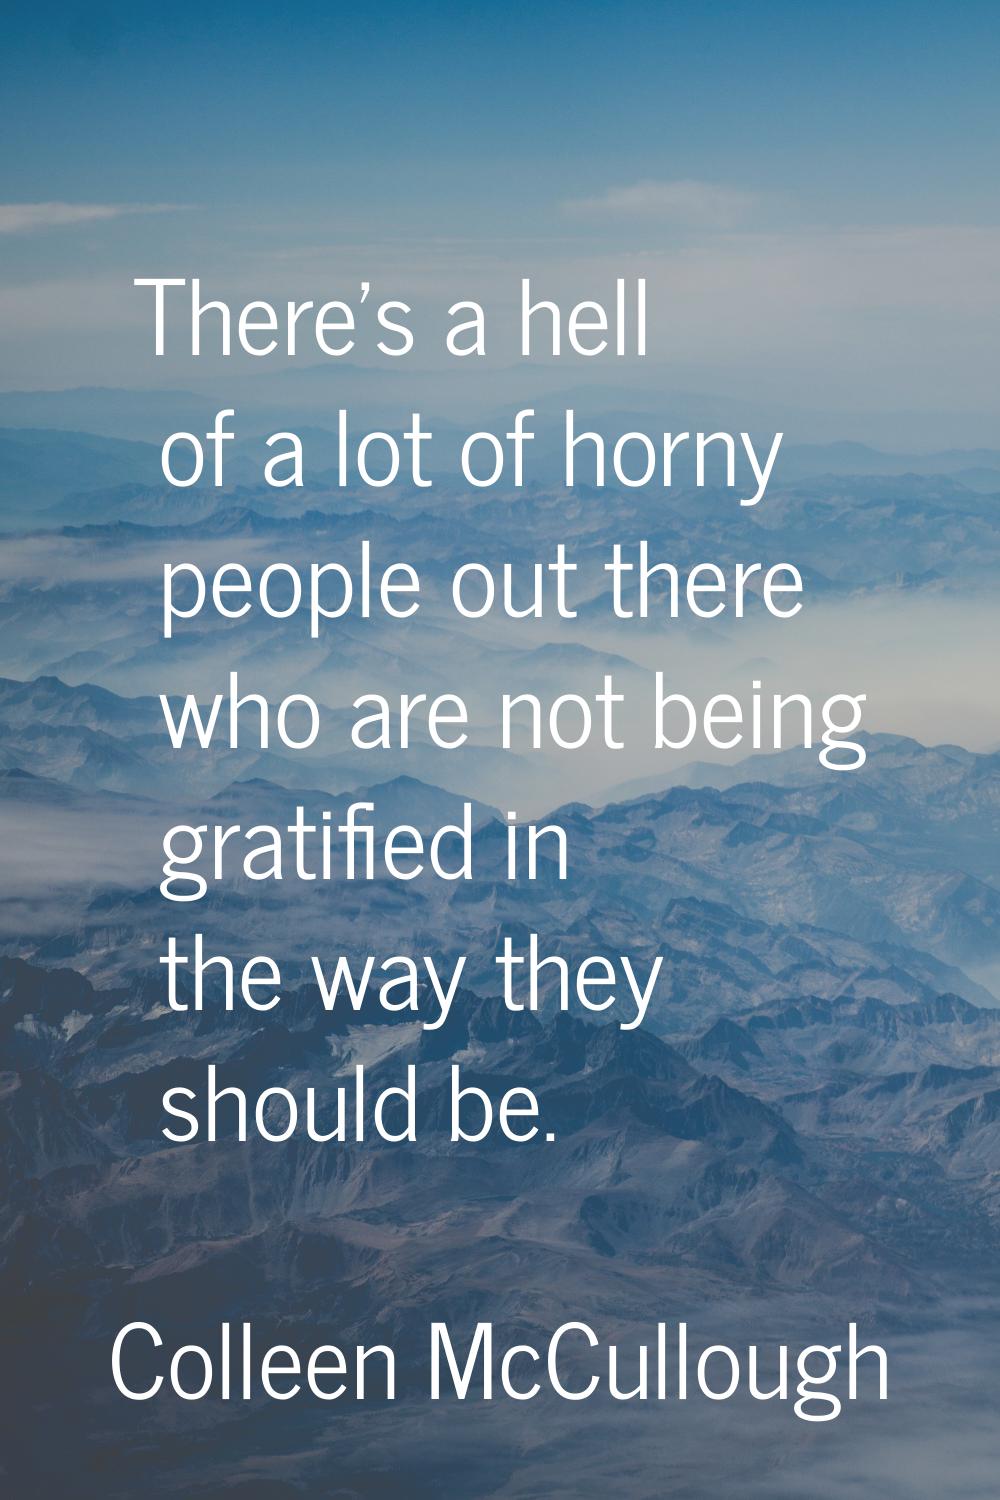 There's a hell of a lot of horny people out there who are not being gratified in the way they shoul